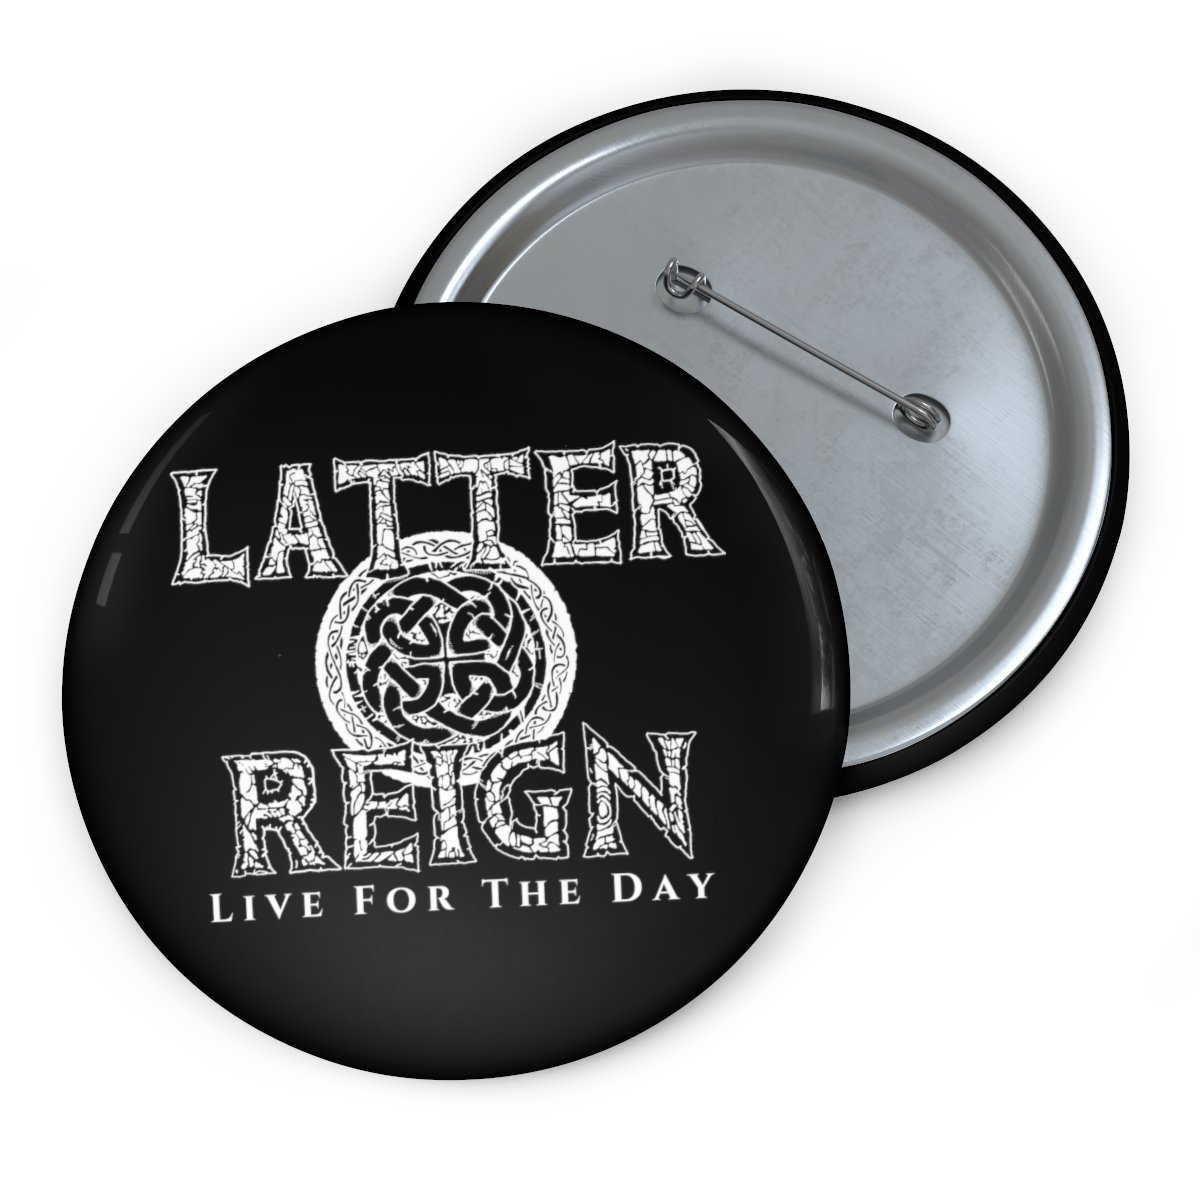 Latter Reign – Live For The Day Logos Black Pin Buttons